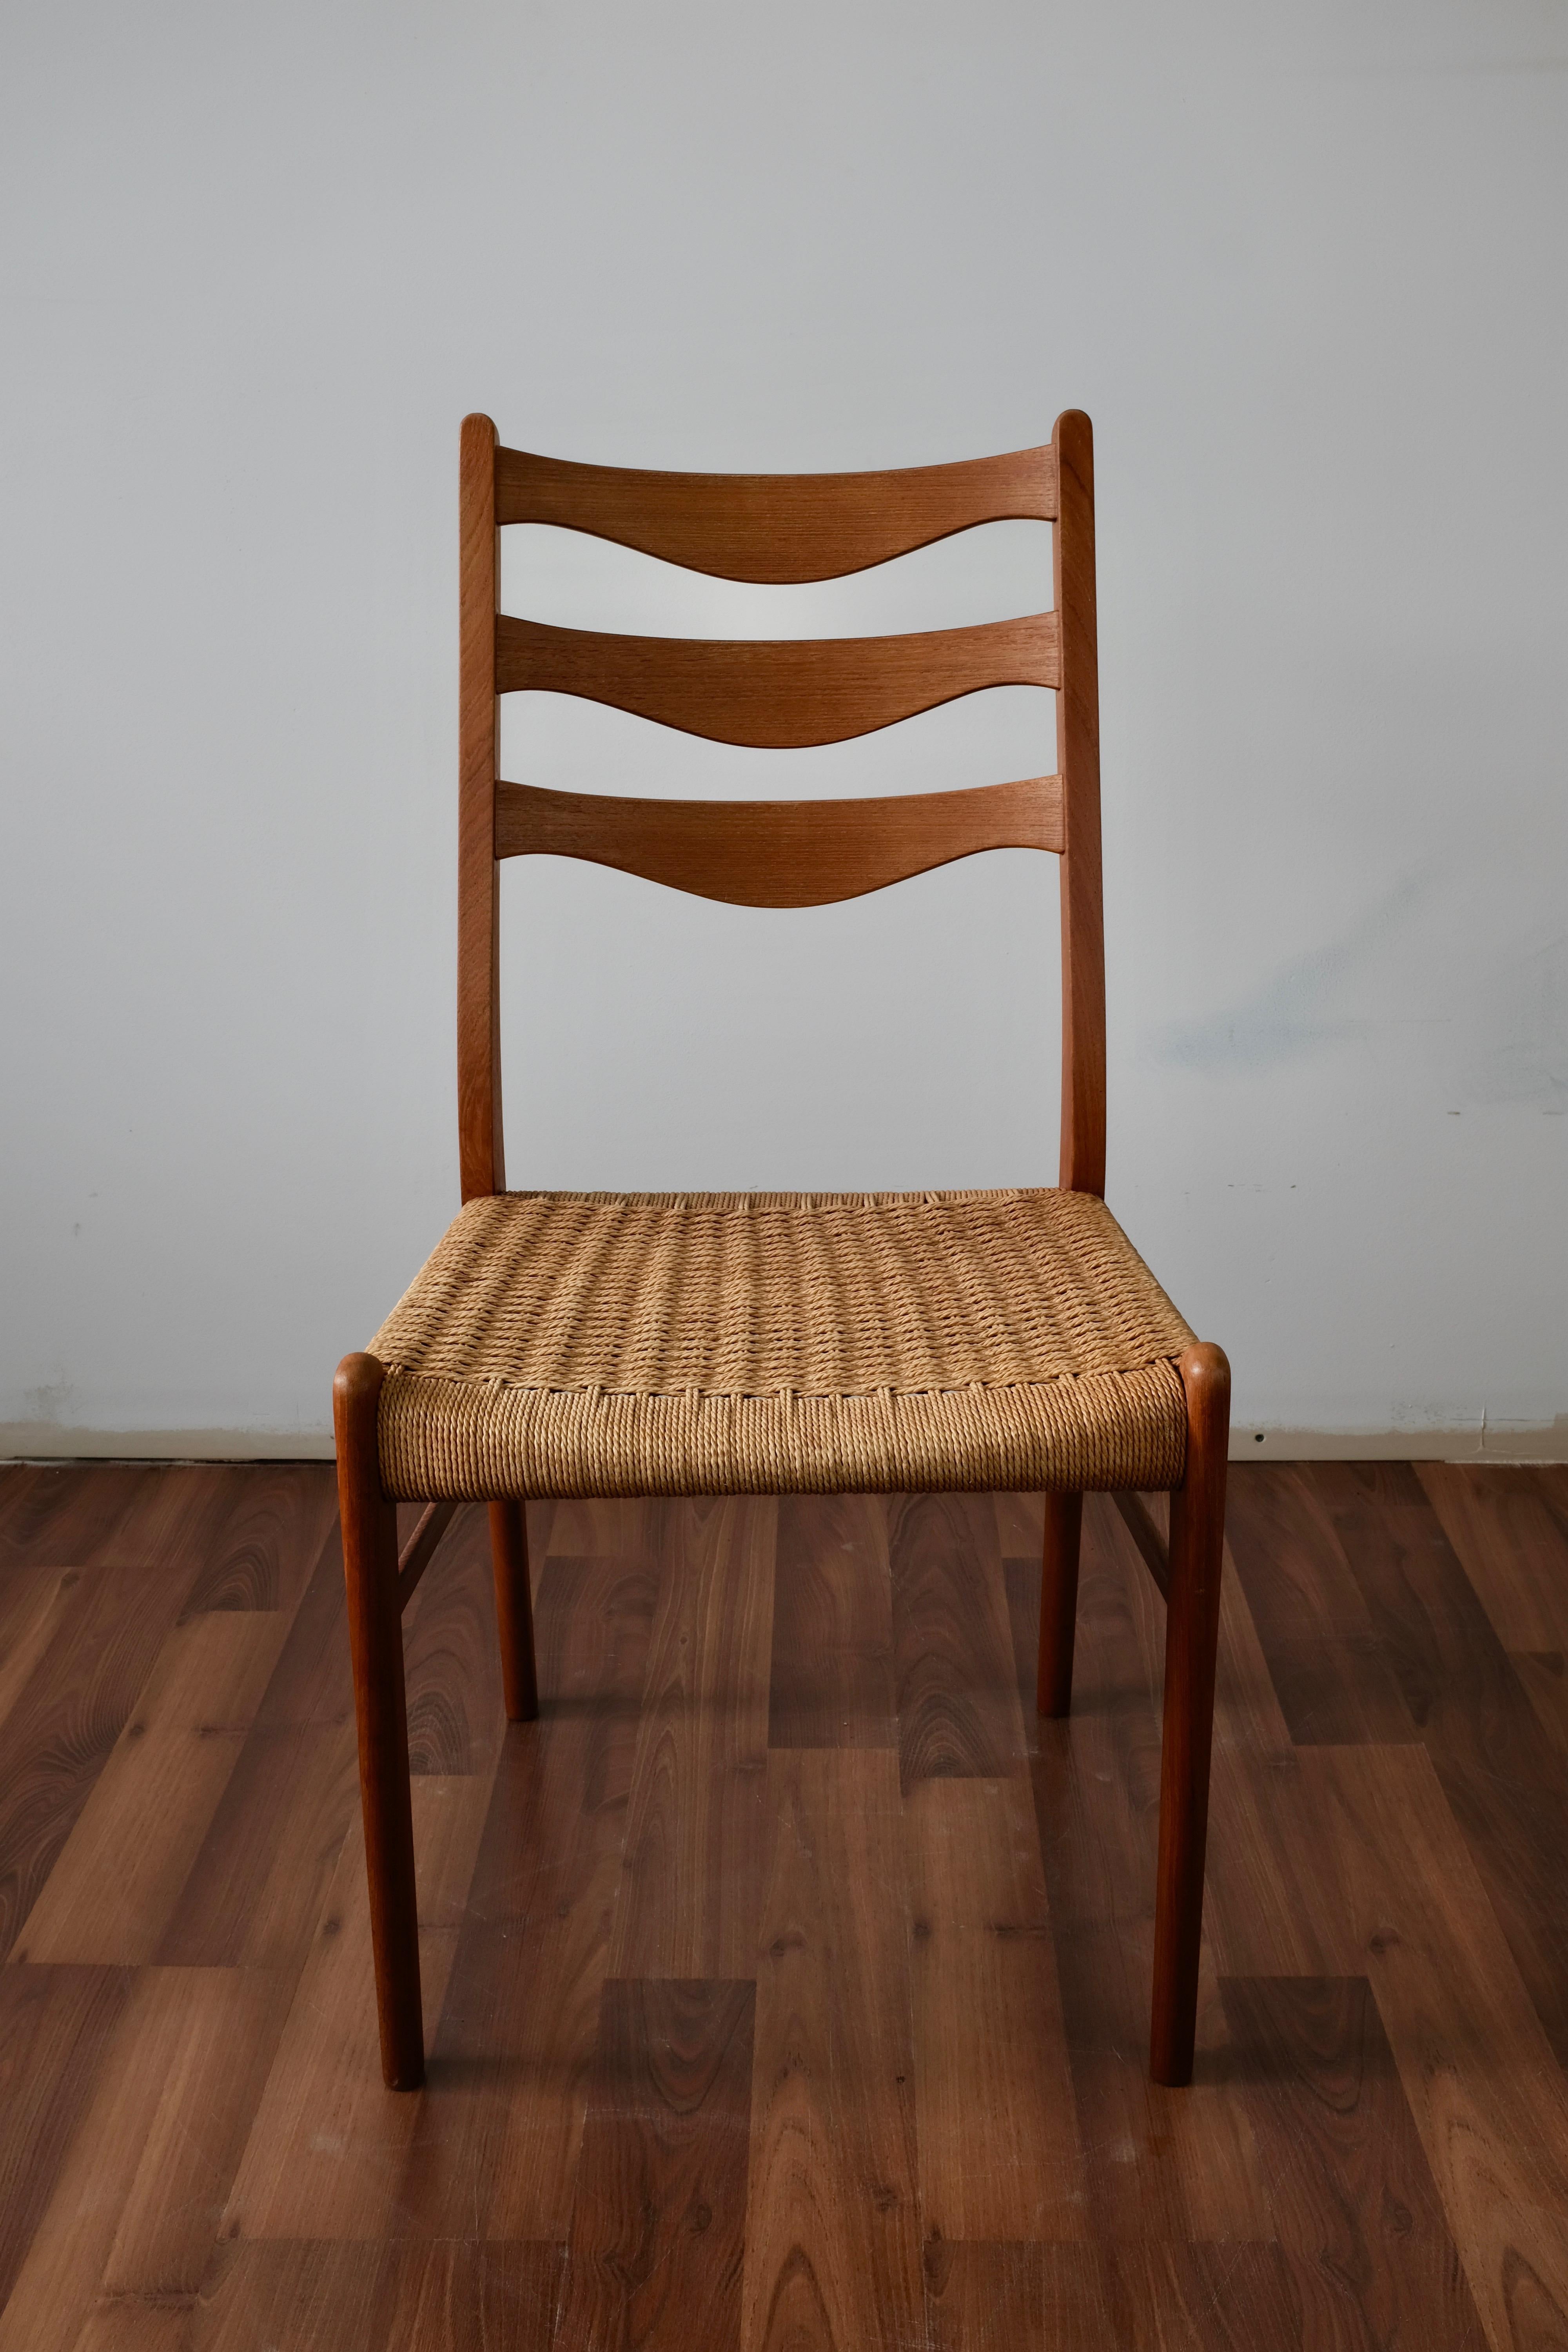 Set of 4 dining chairs designed by Arne Wahl-Iversen and made in Denmark by Glyngøre Stolefabrik in solid teak with 3 back slats and papercord seats.

The chairs have been refinished and are in excellent condition.